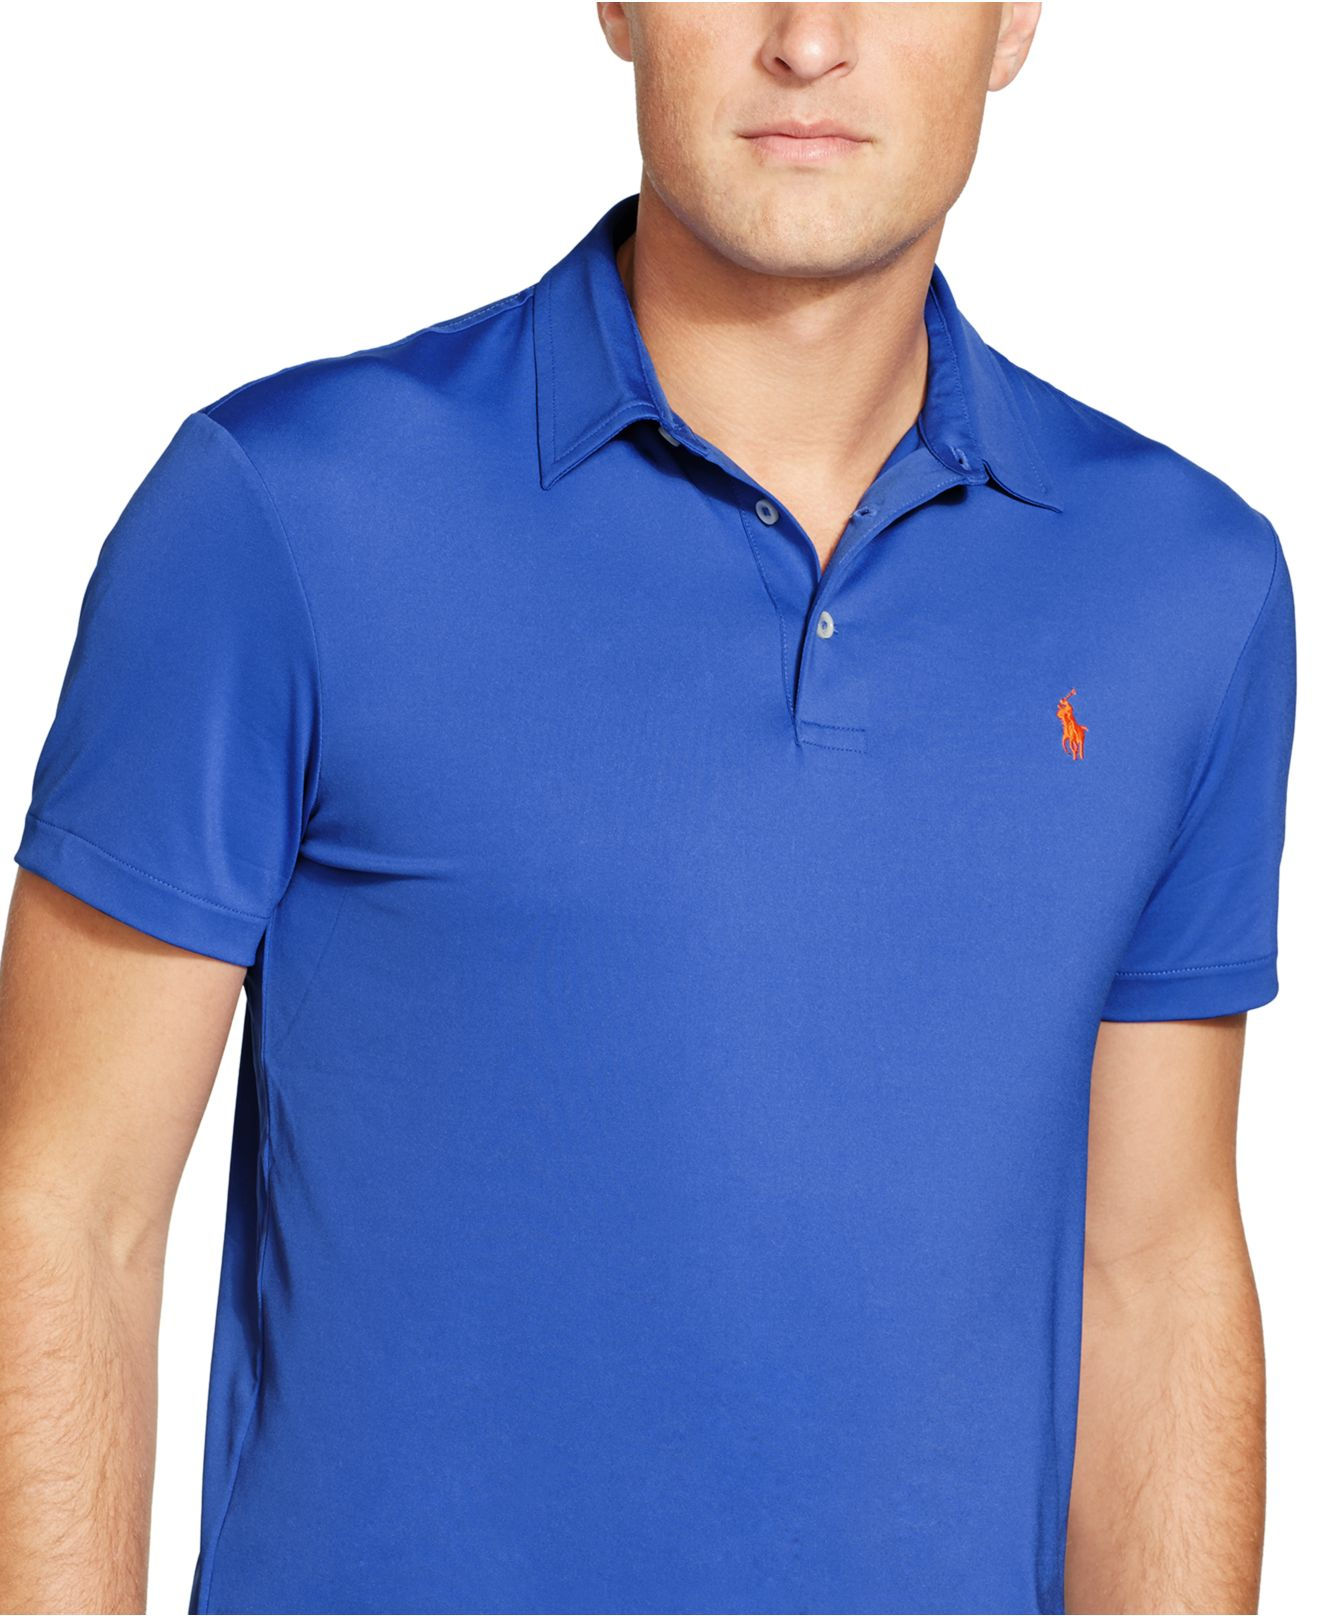 Lyst - Polo ralph lauren Big & Tall Performance Polo Shirt in Blue for Men